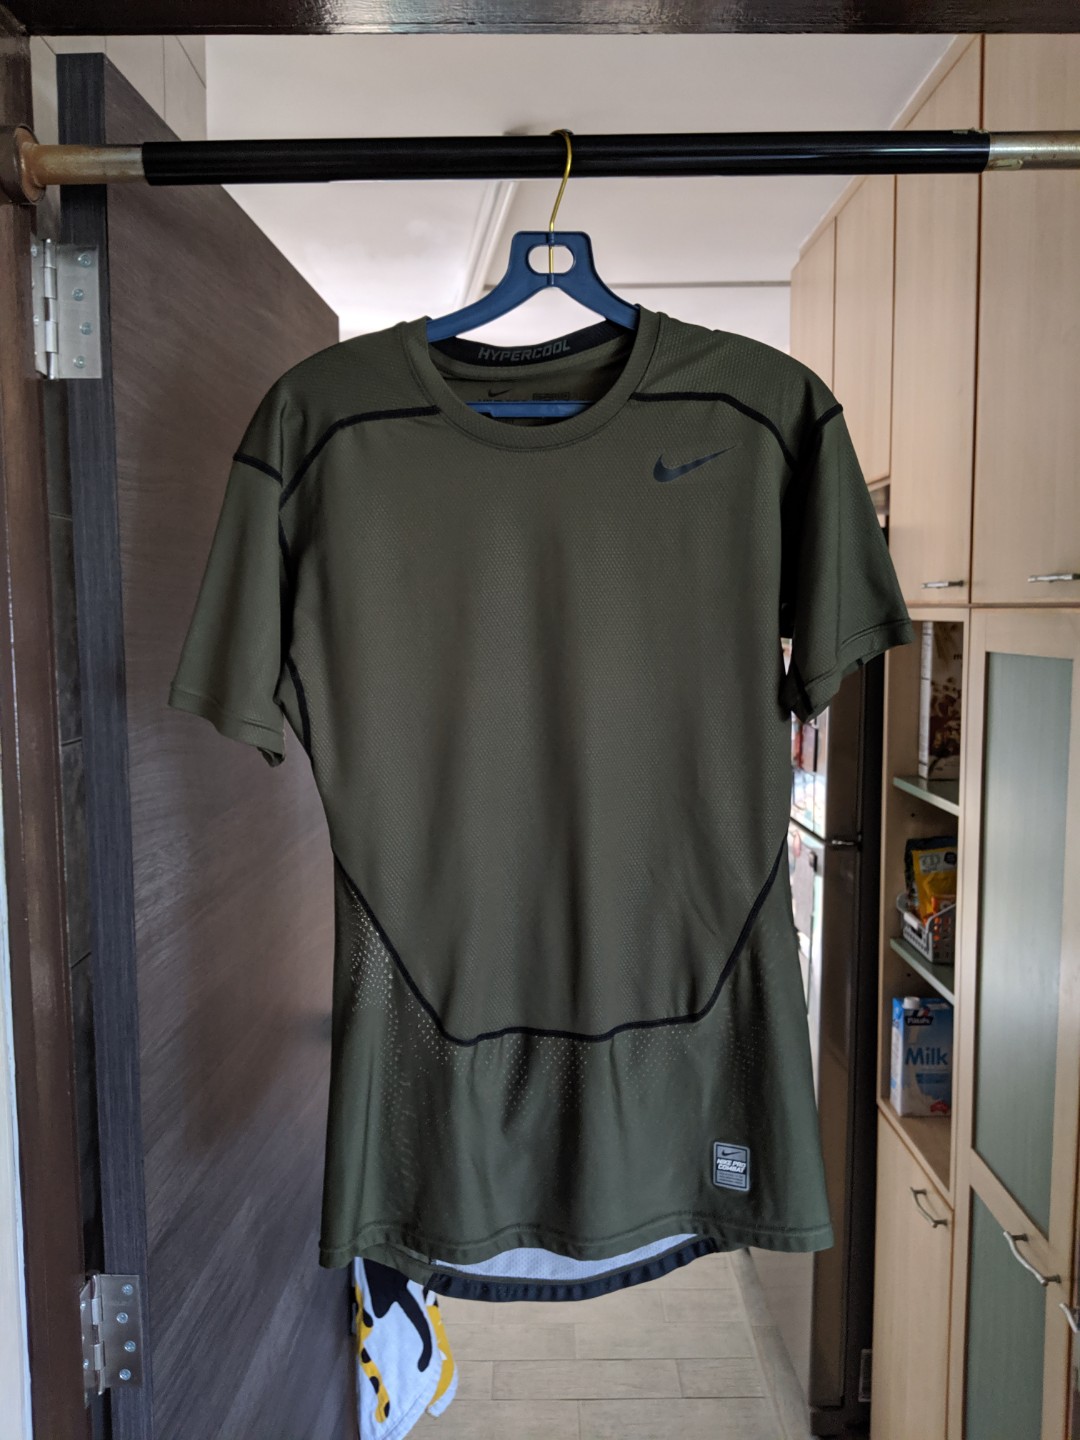 Nike Pro Hypercool Compression Sports Training Dri-Fit Shirt (XL size - Olive Green Colour), Men's Fashion, Activewear on Carousell